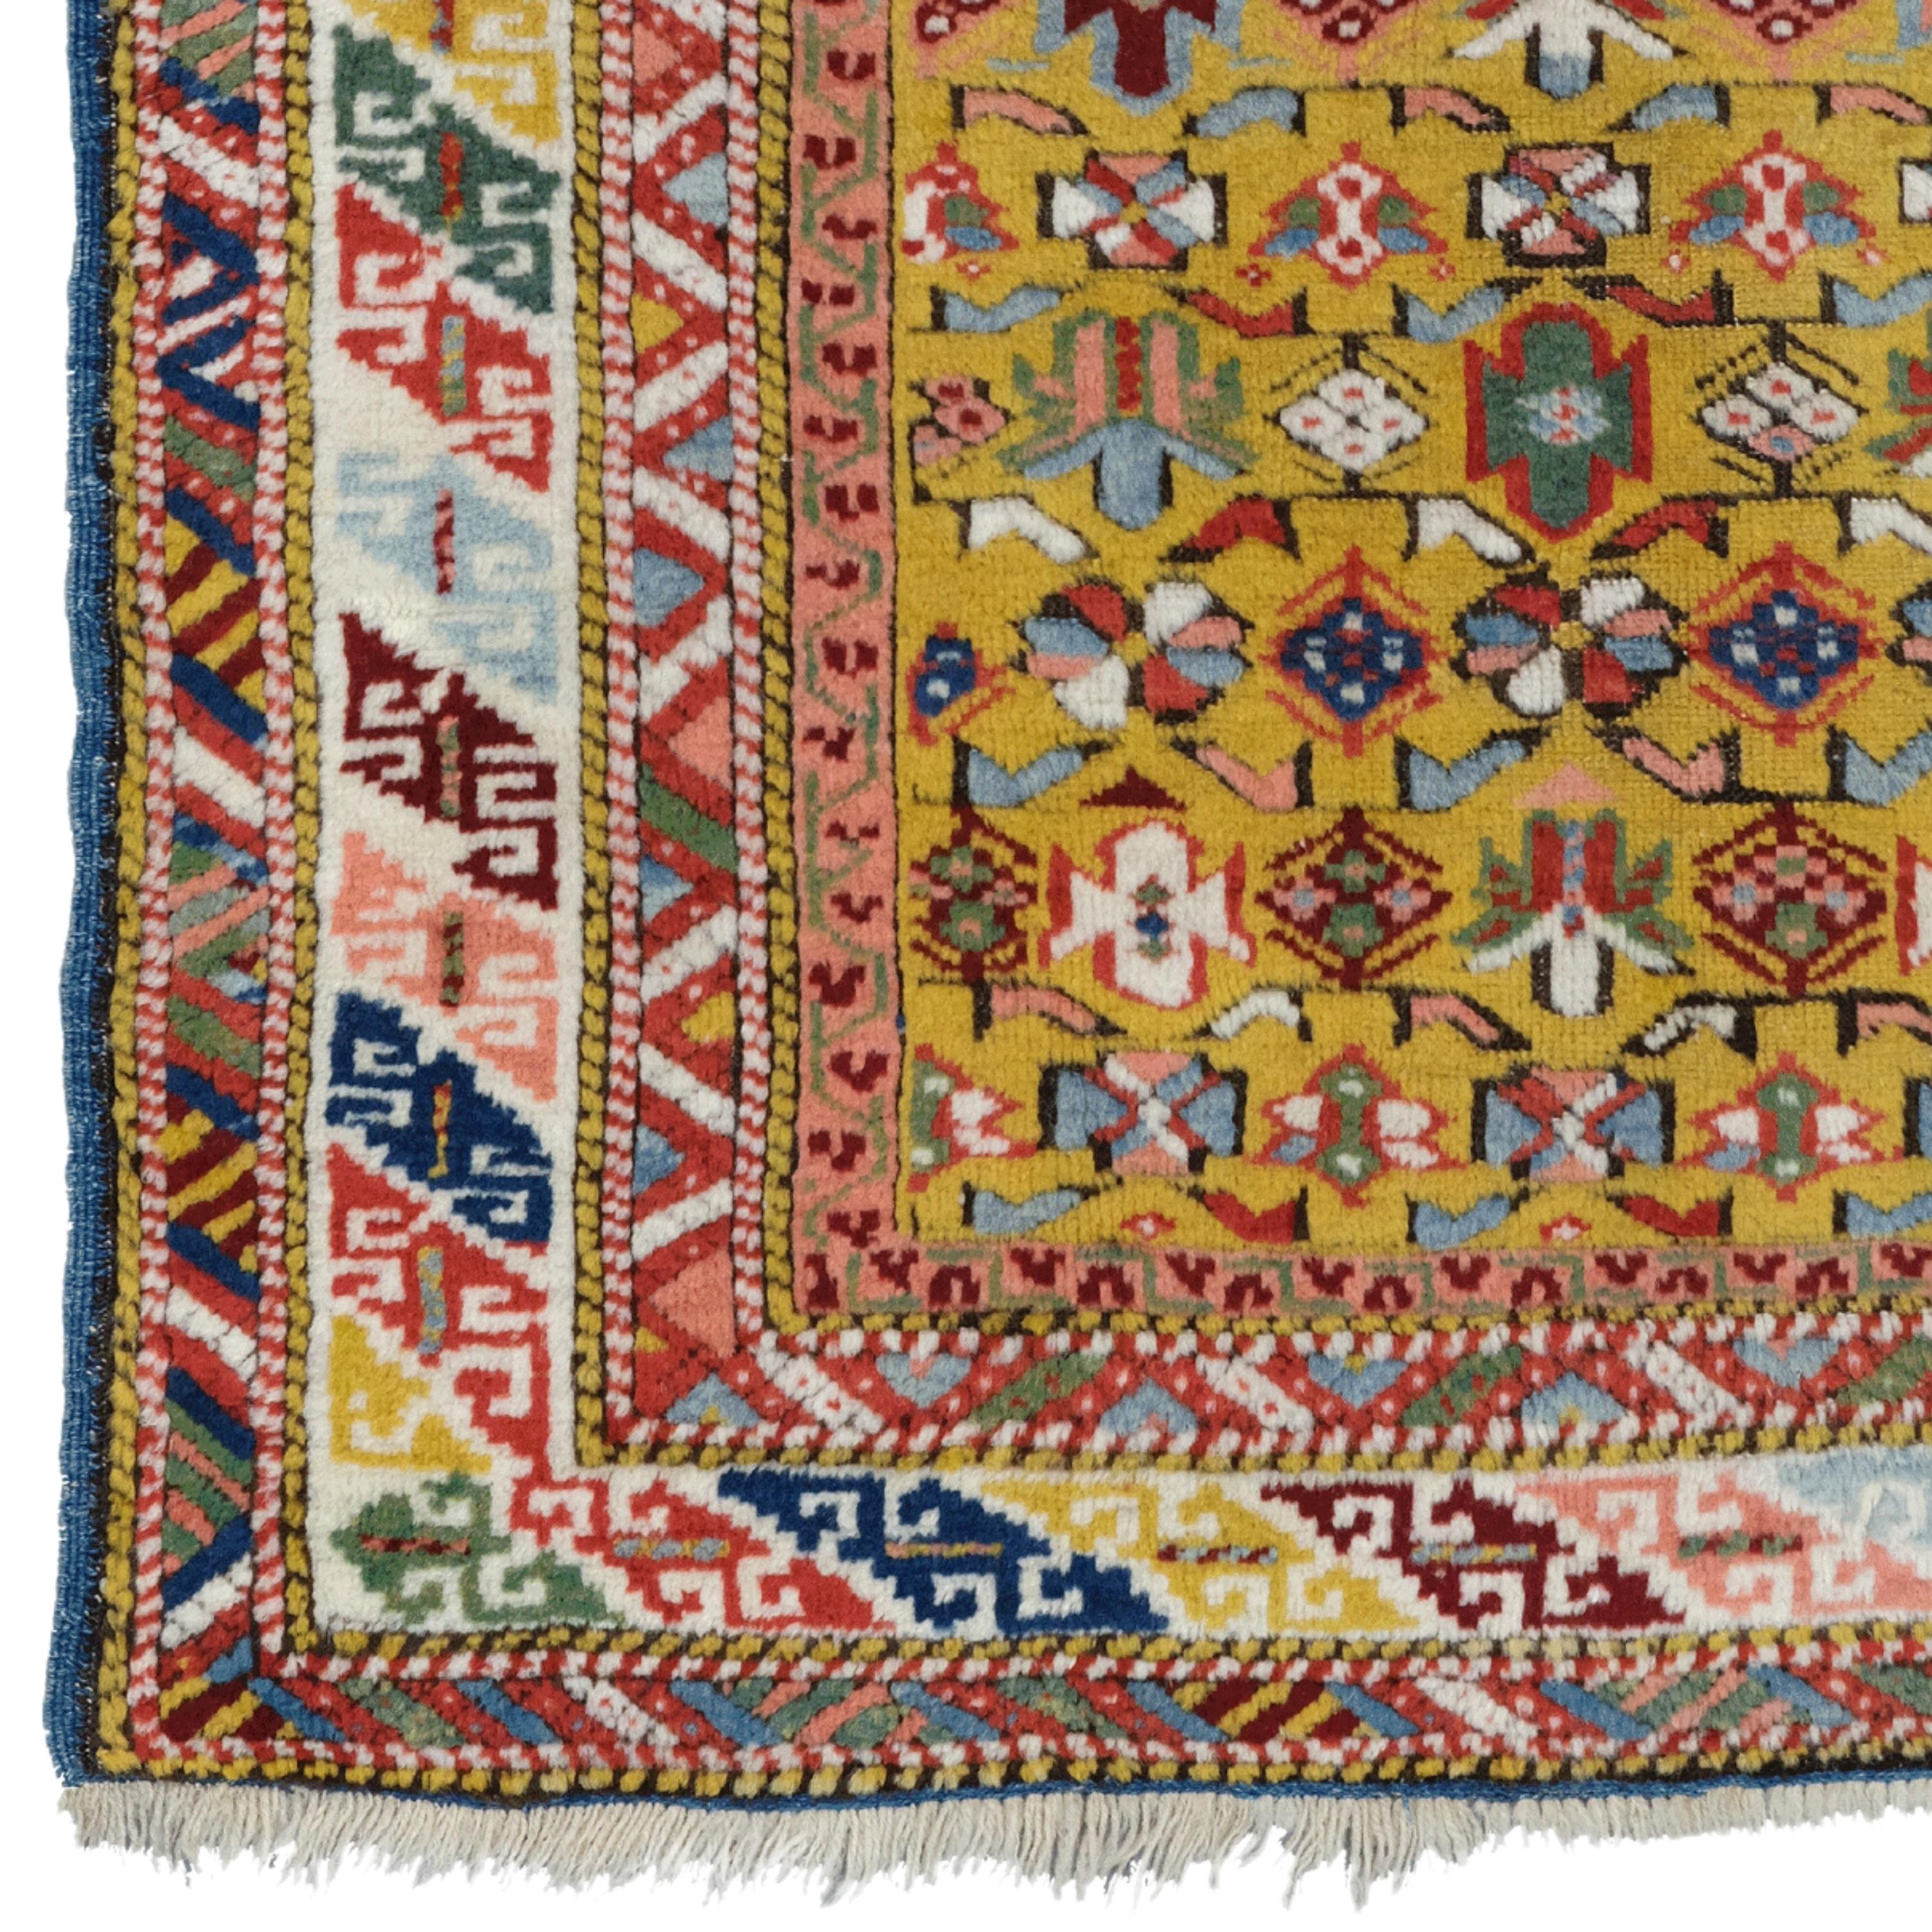 Yellow Ground Shirvan Rug Circa 1880
Size : 104 x 160 cm

This impressive 1880s antique yellow Shirvan rug is expertly woven with carefully selected woolen threads. Geometric patterns and motifs in various colors embroidered on a rich yellow